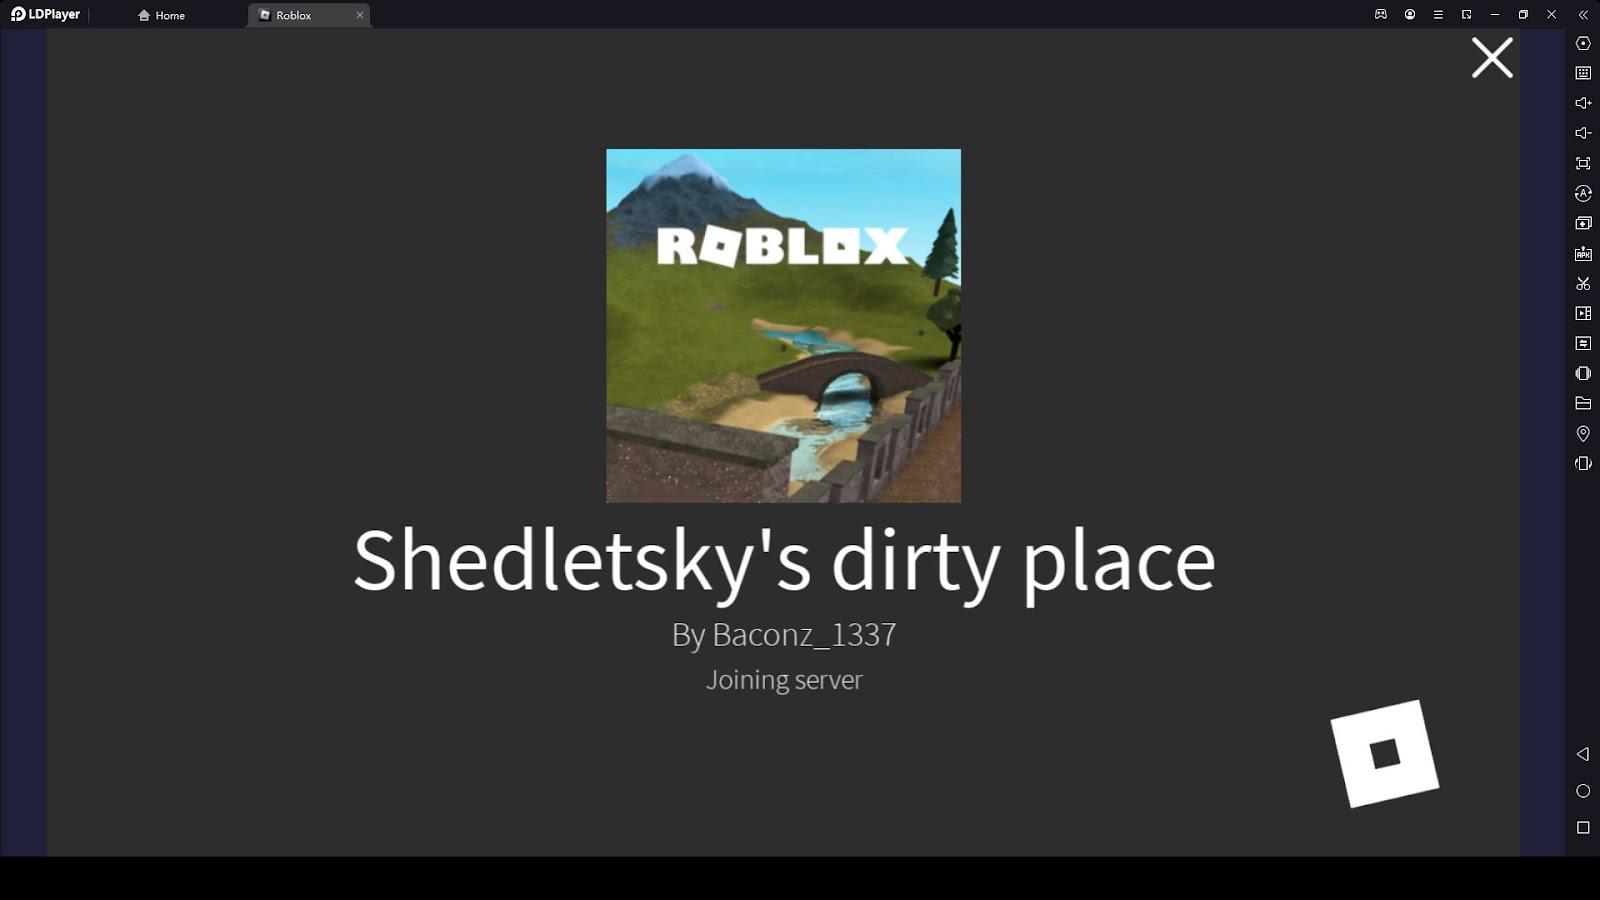 Rr34 Roblox Game for Mobbile